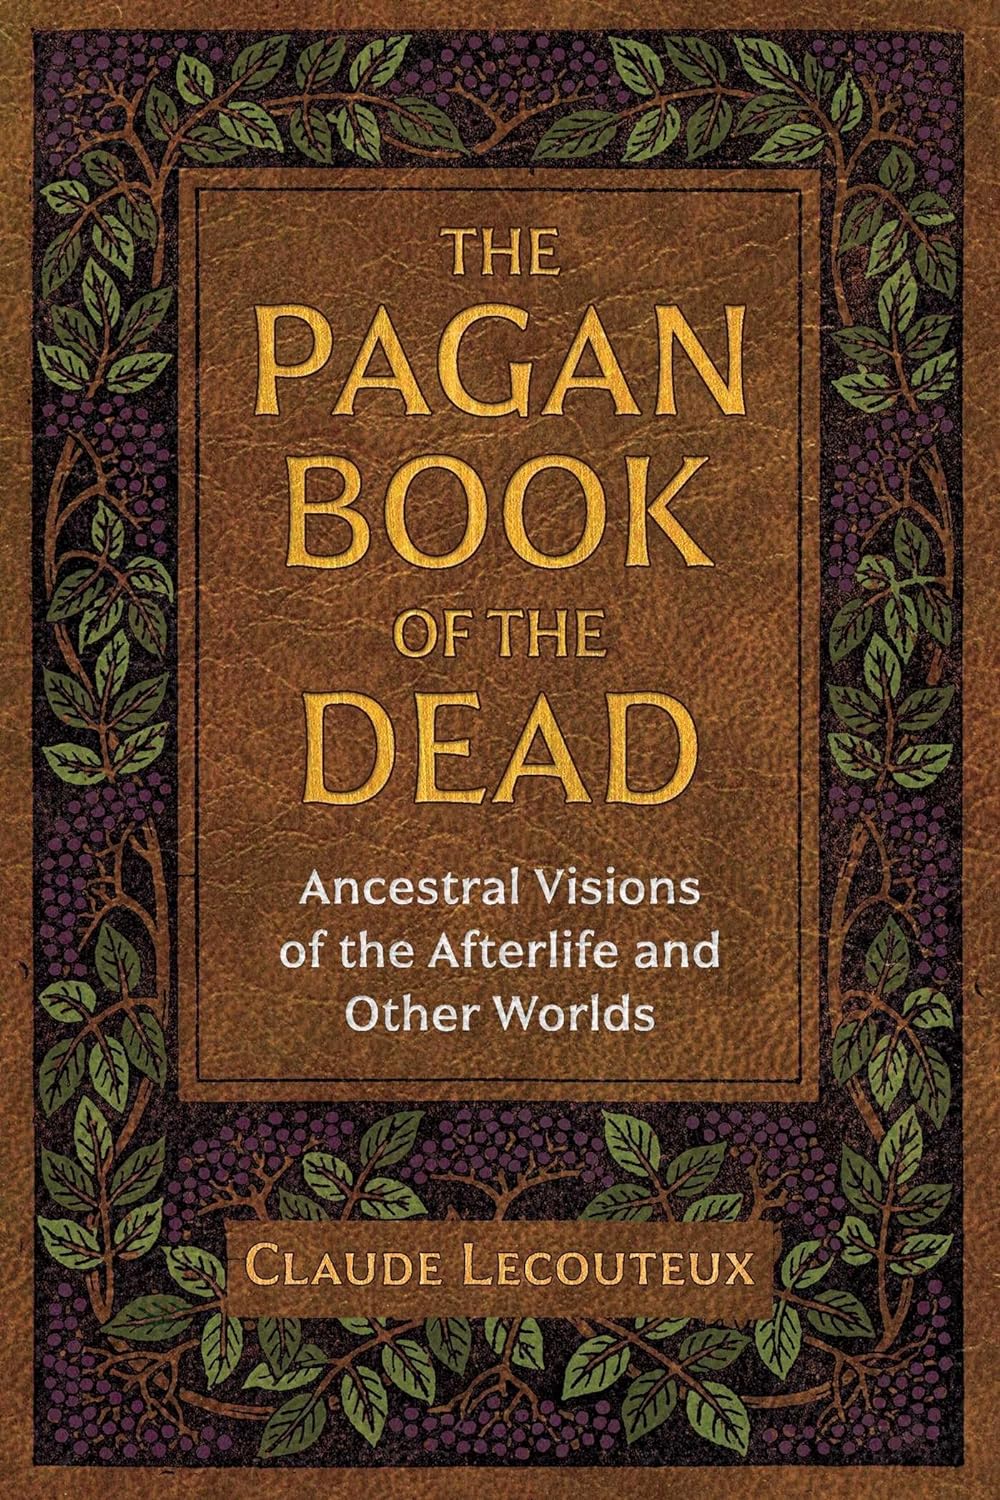 Claude Lecouteux: Pagan Book of the Dead (2020, Inner Traditions International, Limited, Inner Traditions)